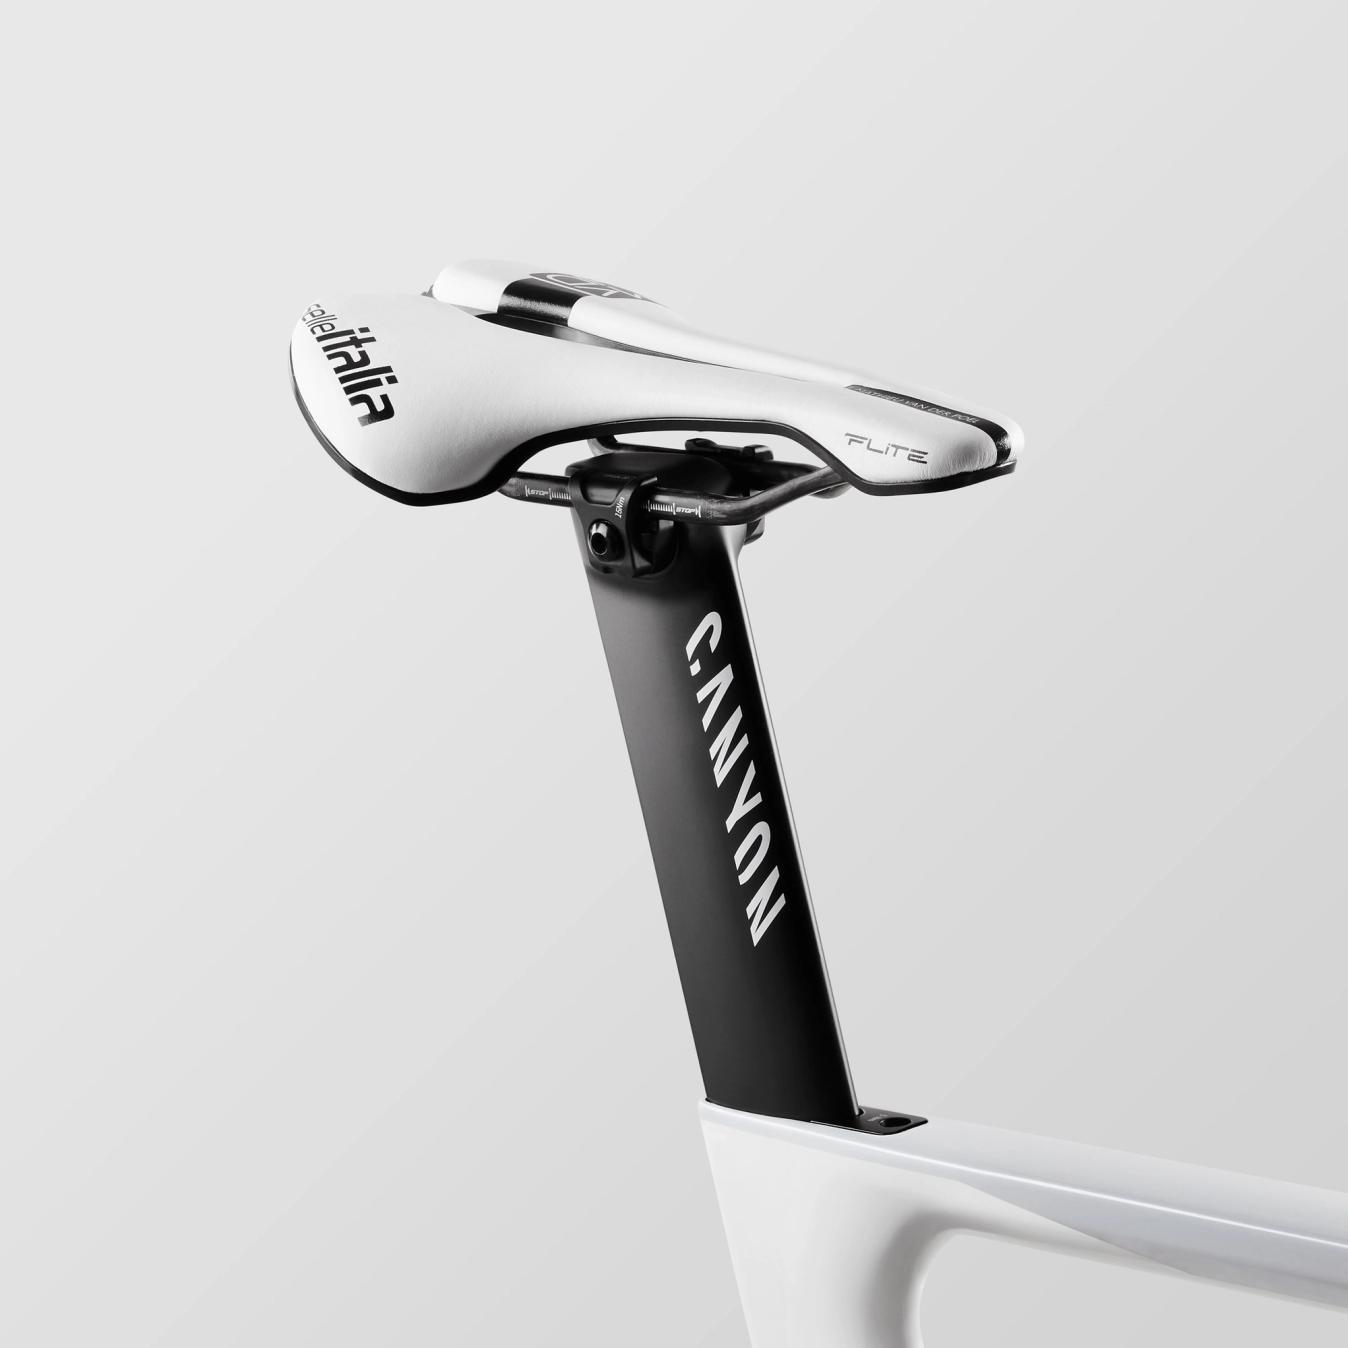 Unique van der Poel-inspired features include a limited-edition saddle.